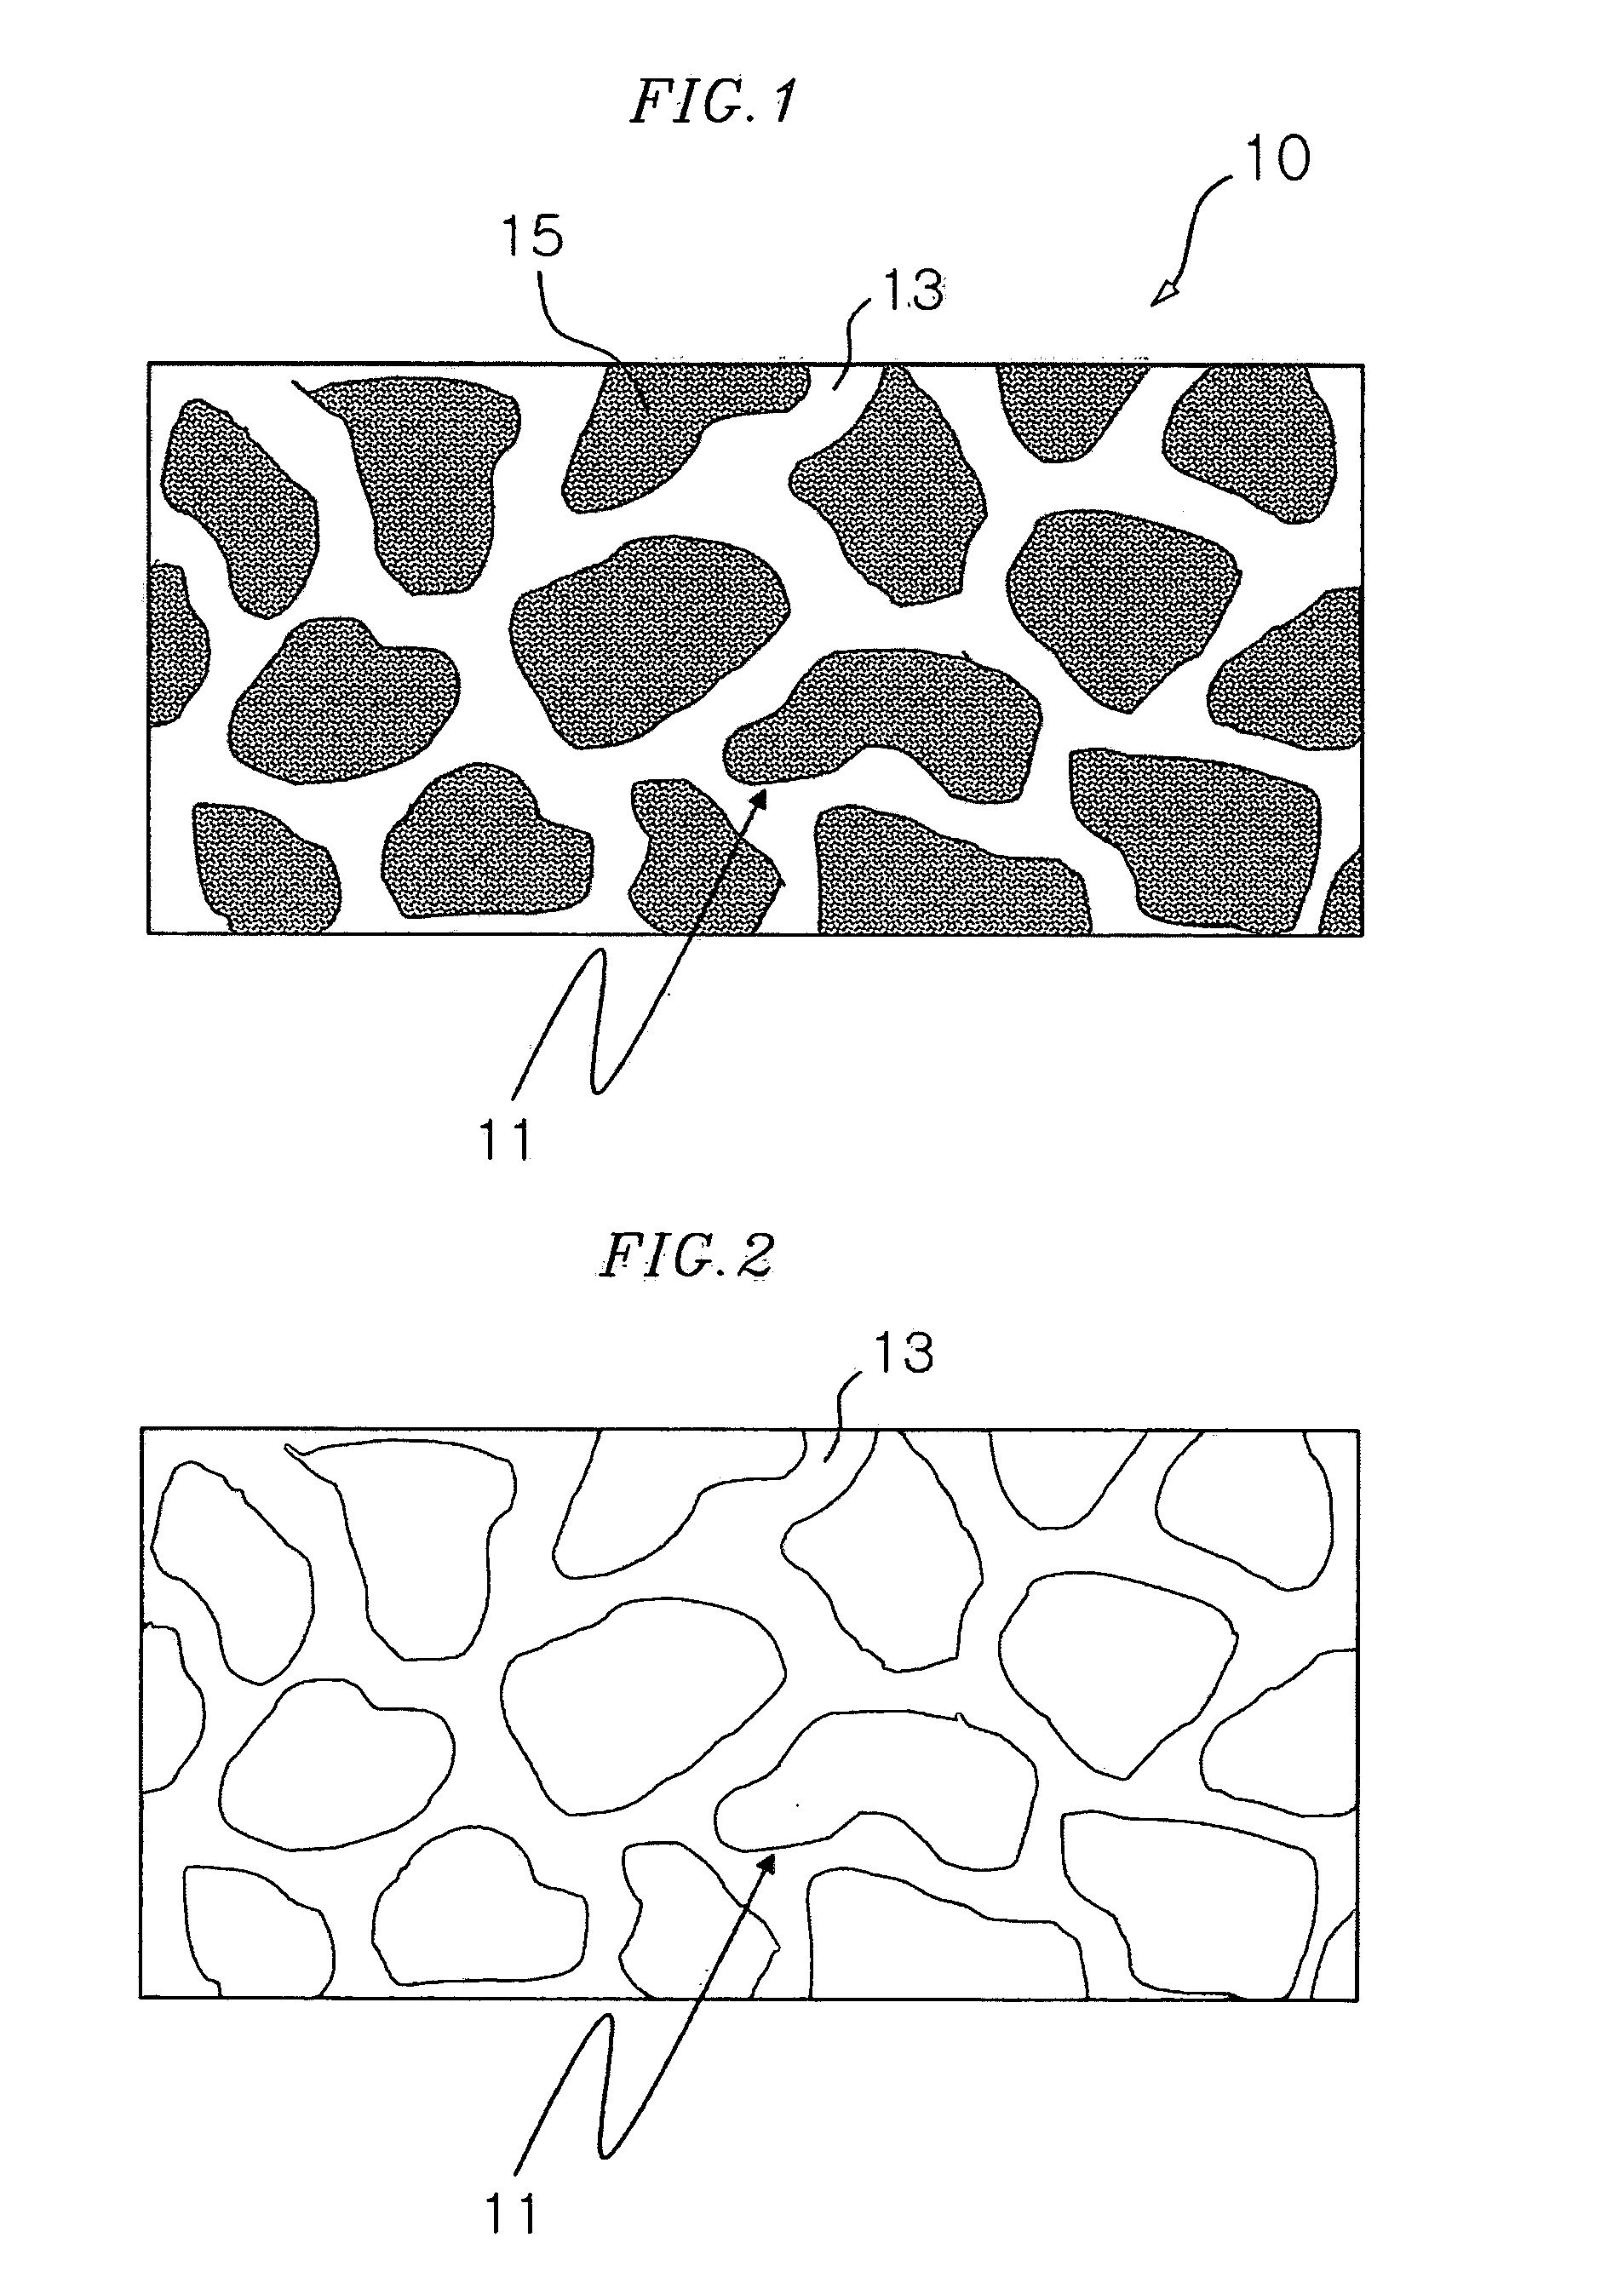 Polymer electrolyte membrane for fuel cell and method for preparing the same